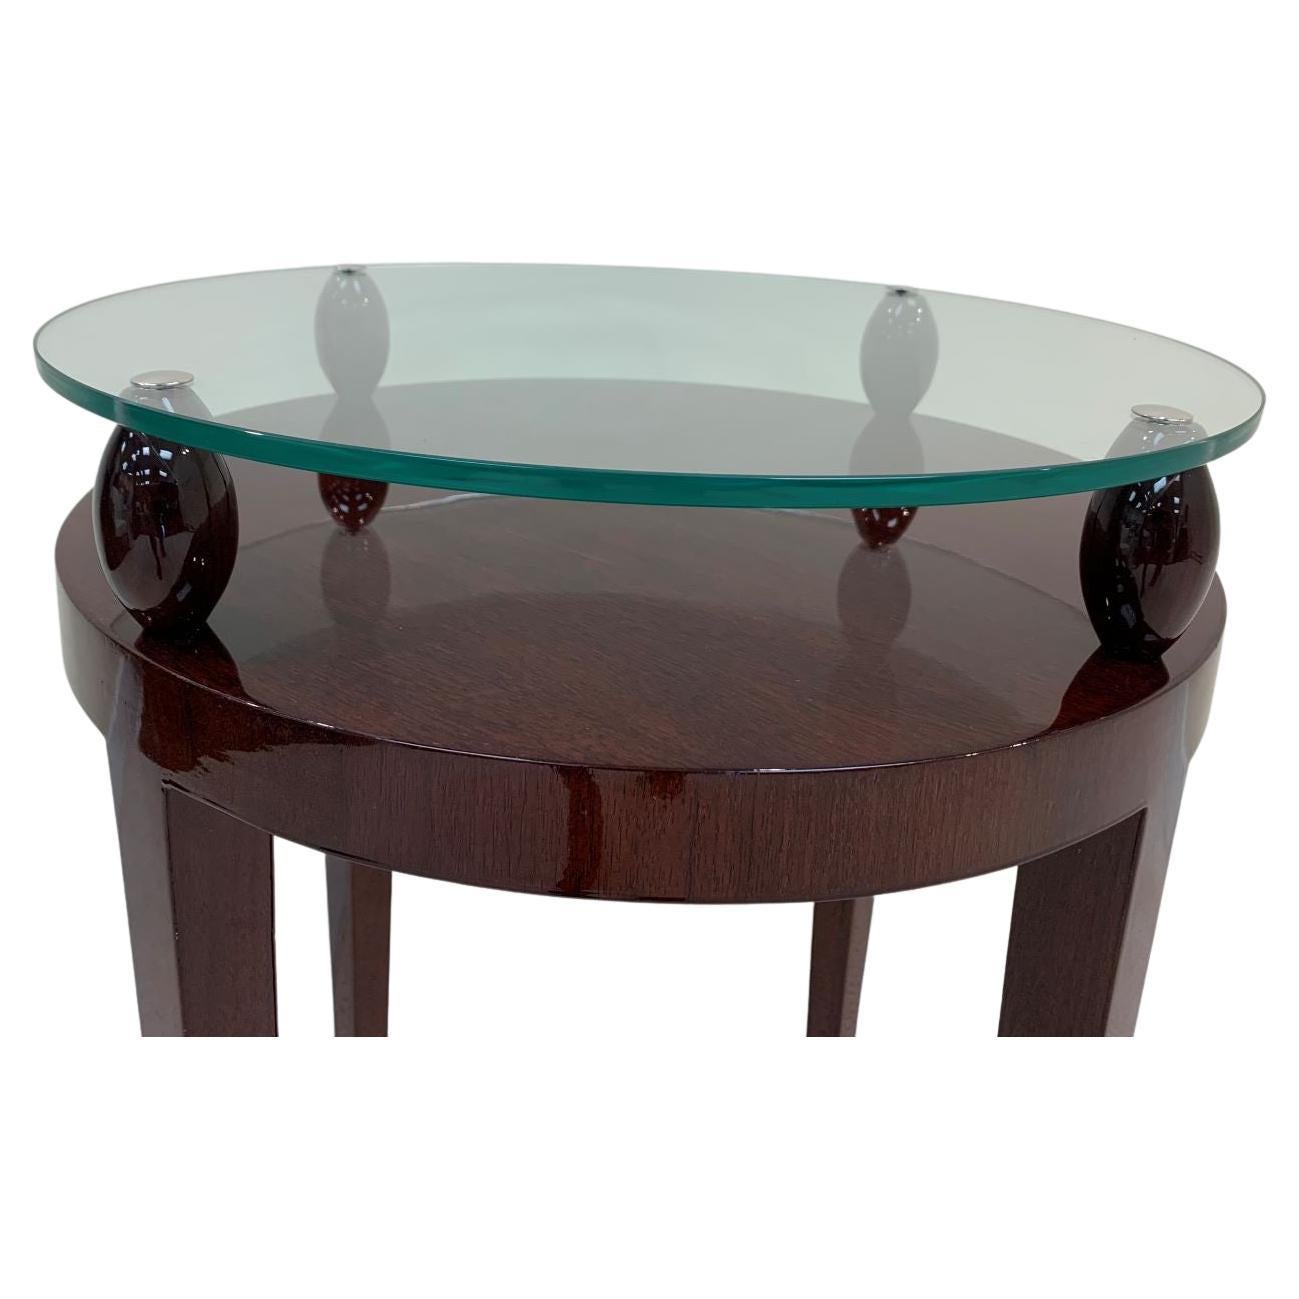 American Stunning Pair of Round  Art Deco Glass-Top Side Tables In Walnut Circa 1940's For Sale